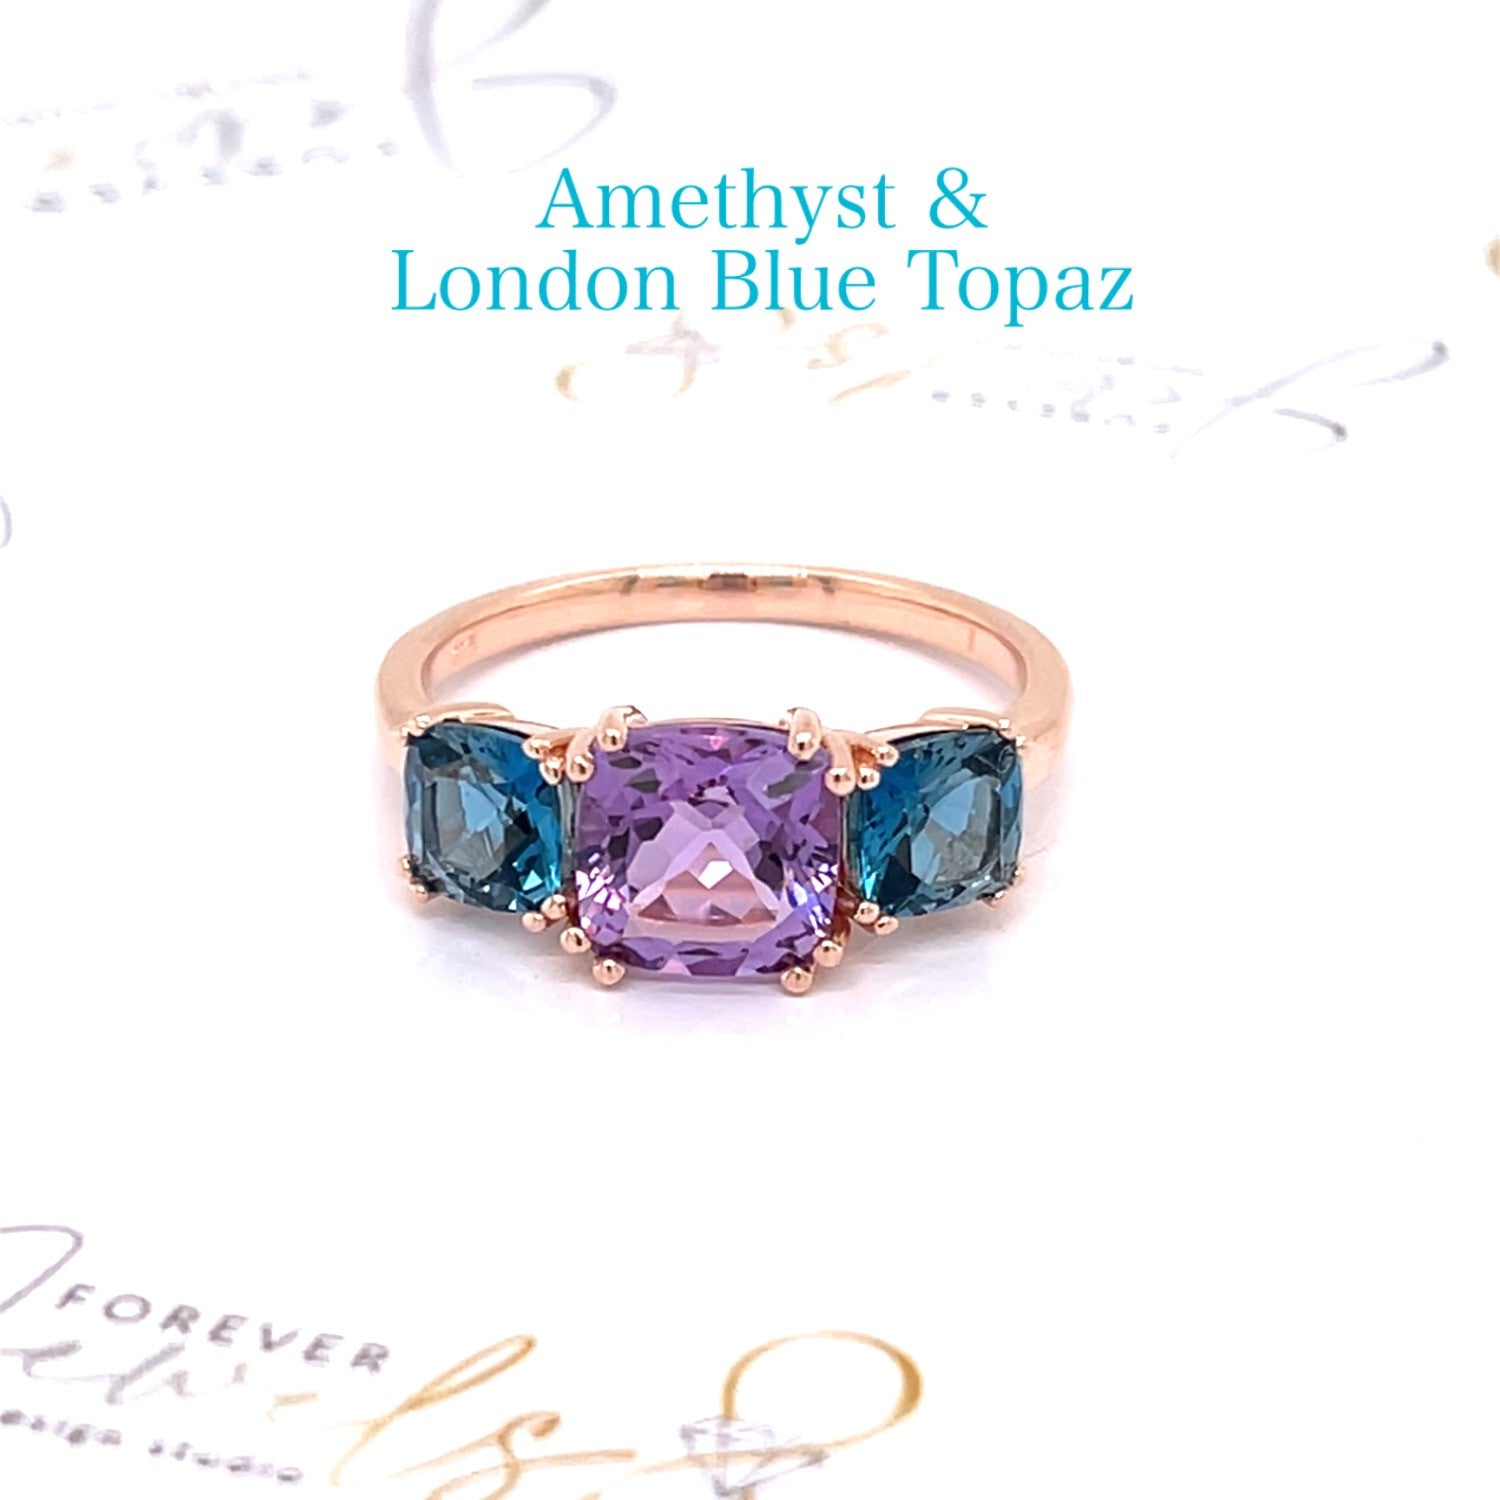 Amethyst and London Blue Topaz Trilogy Ring